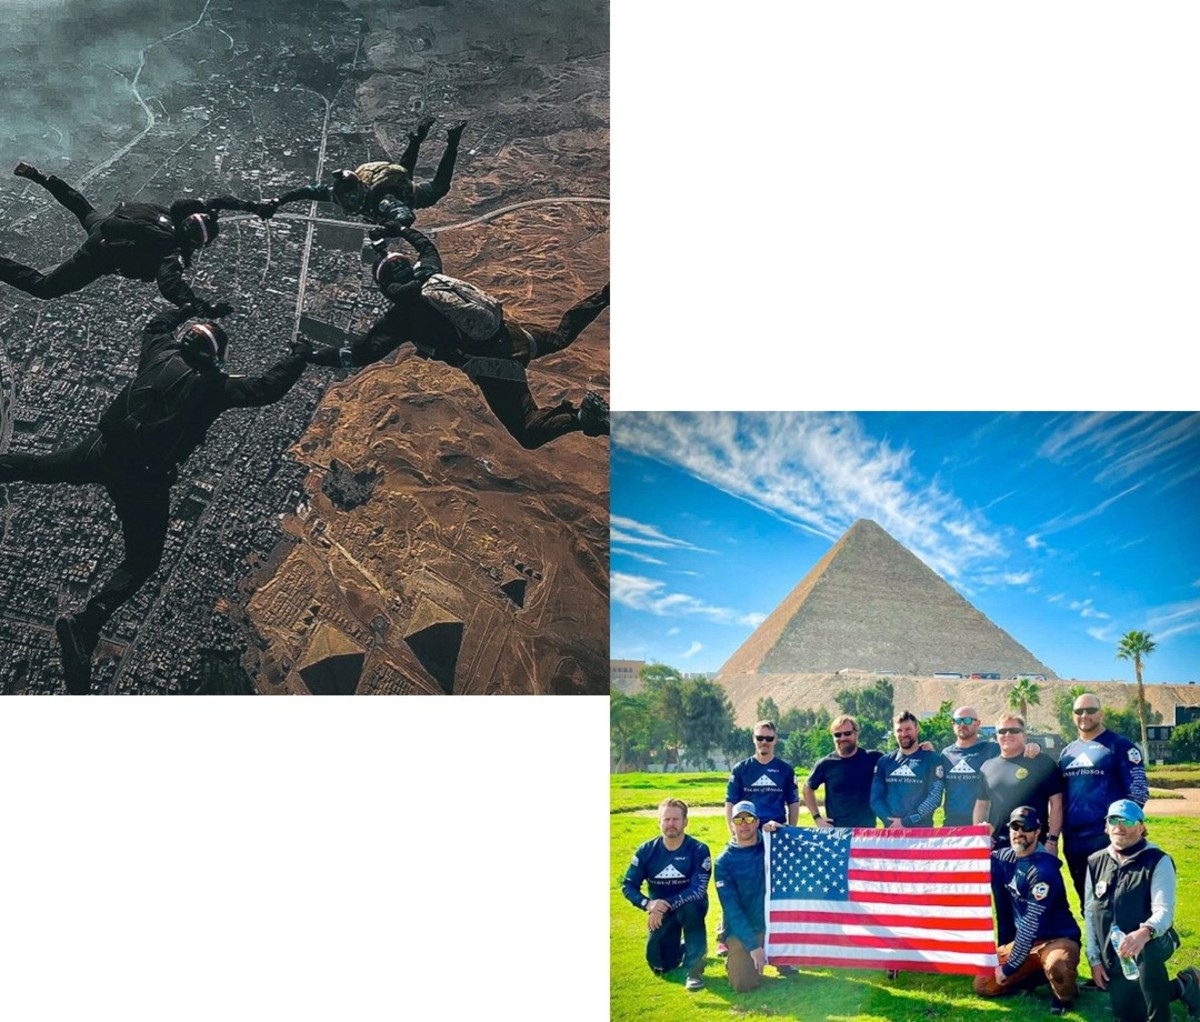 Skydivers in air and on land in front of pyramid